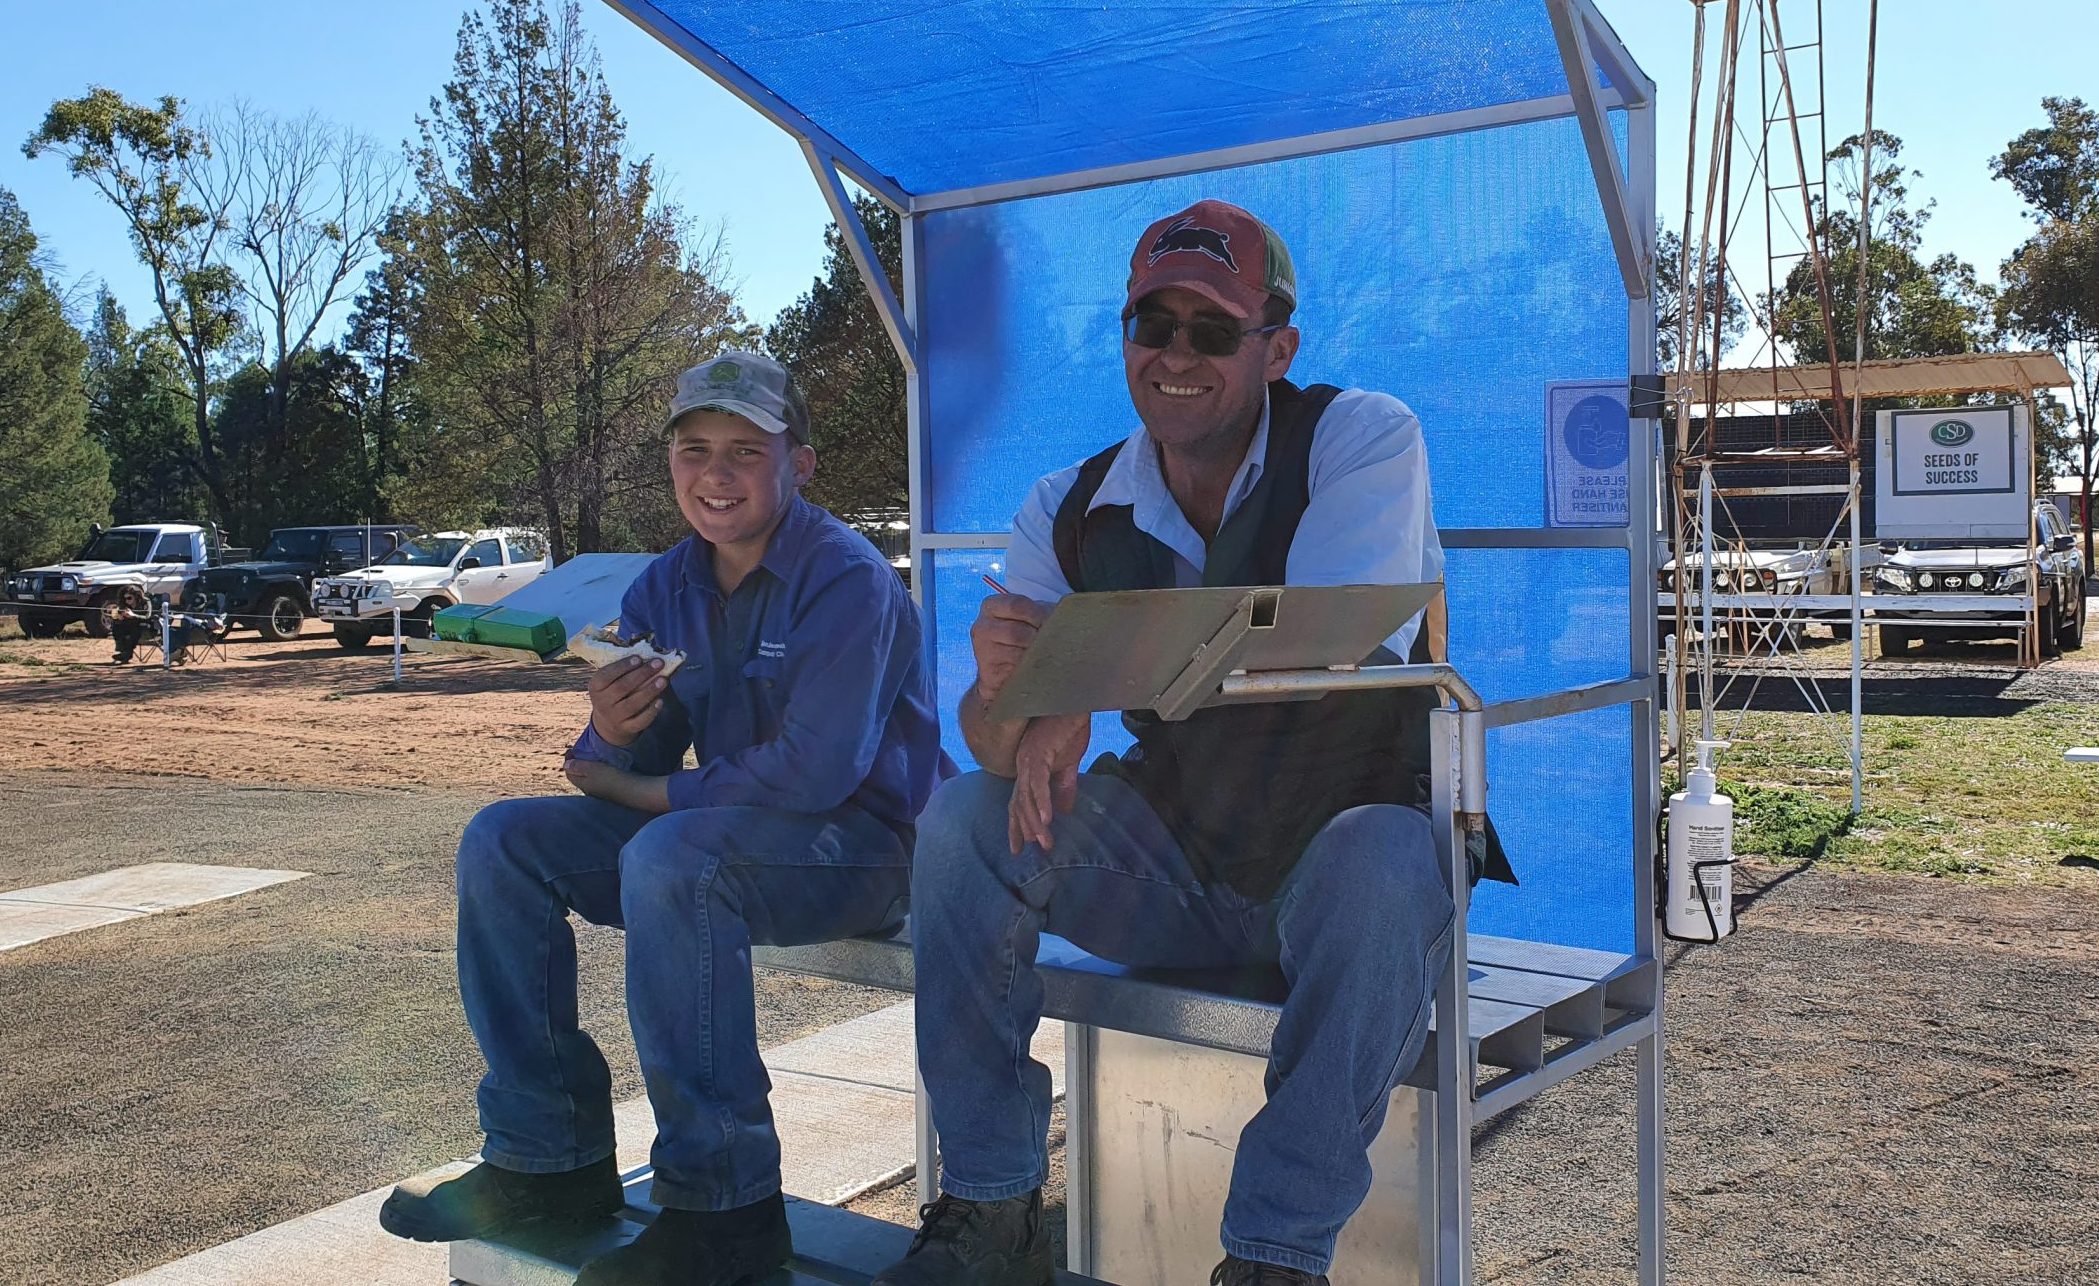 Narrabri Clay Target Club hosts its first monthly shoot since February